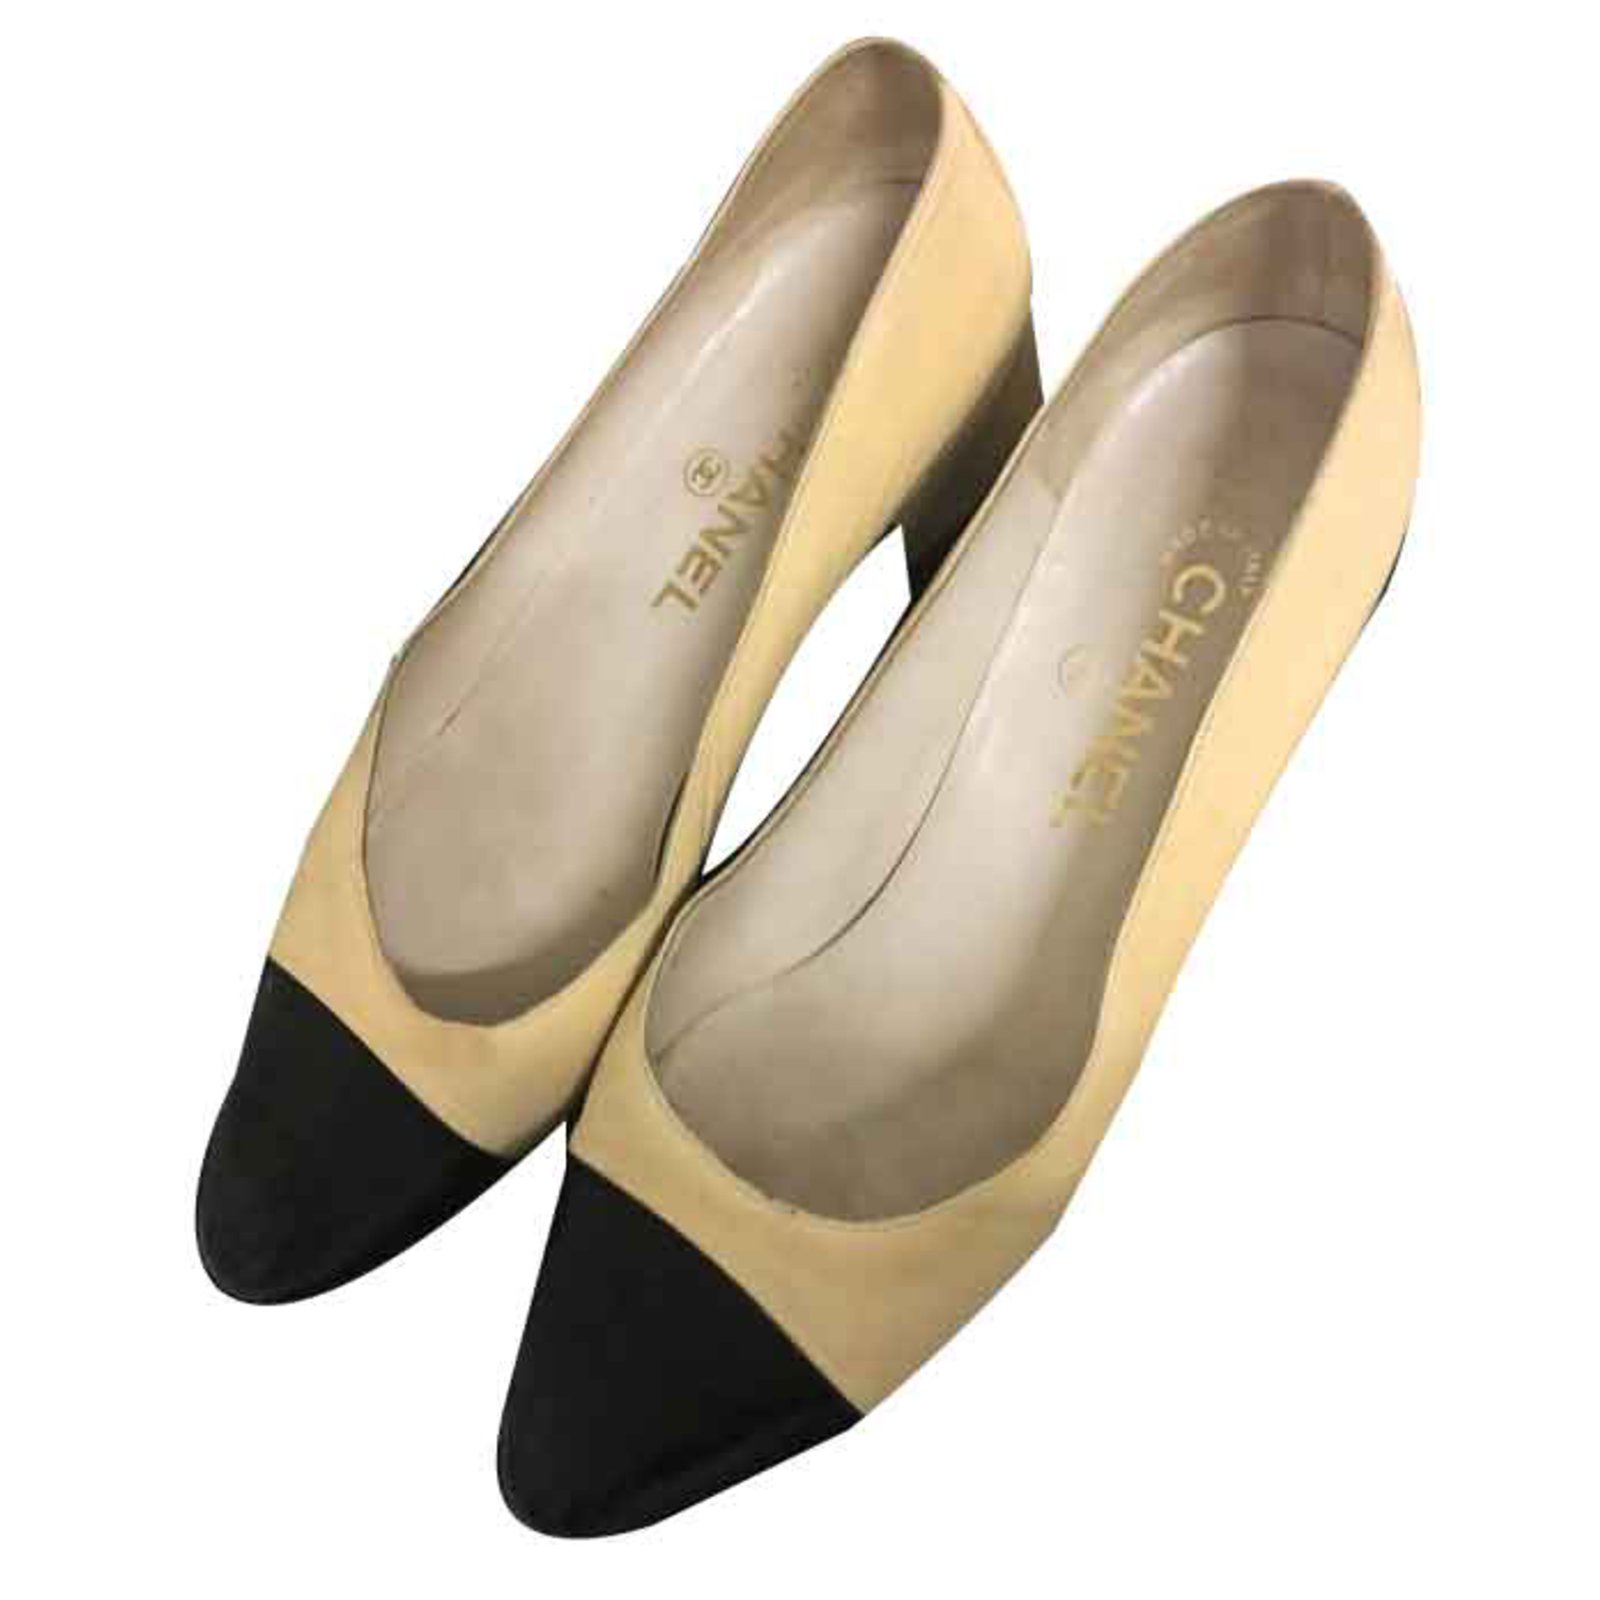 CHANEL, Shoes, Chanel Cambon Quilted Leather Cc Logo Ballerina Ballet  Flats Size 37 65